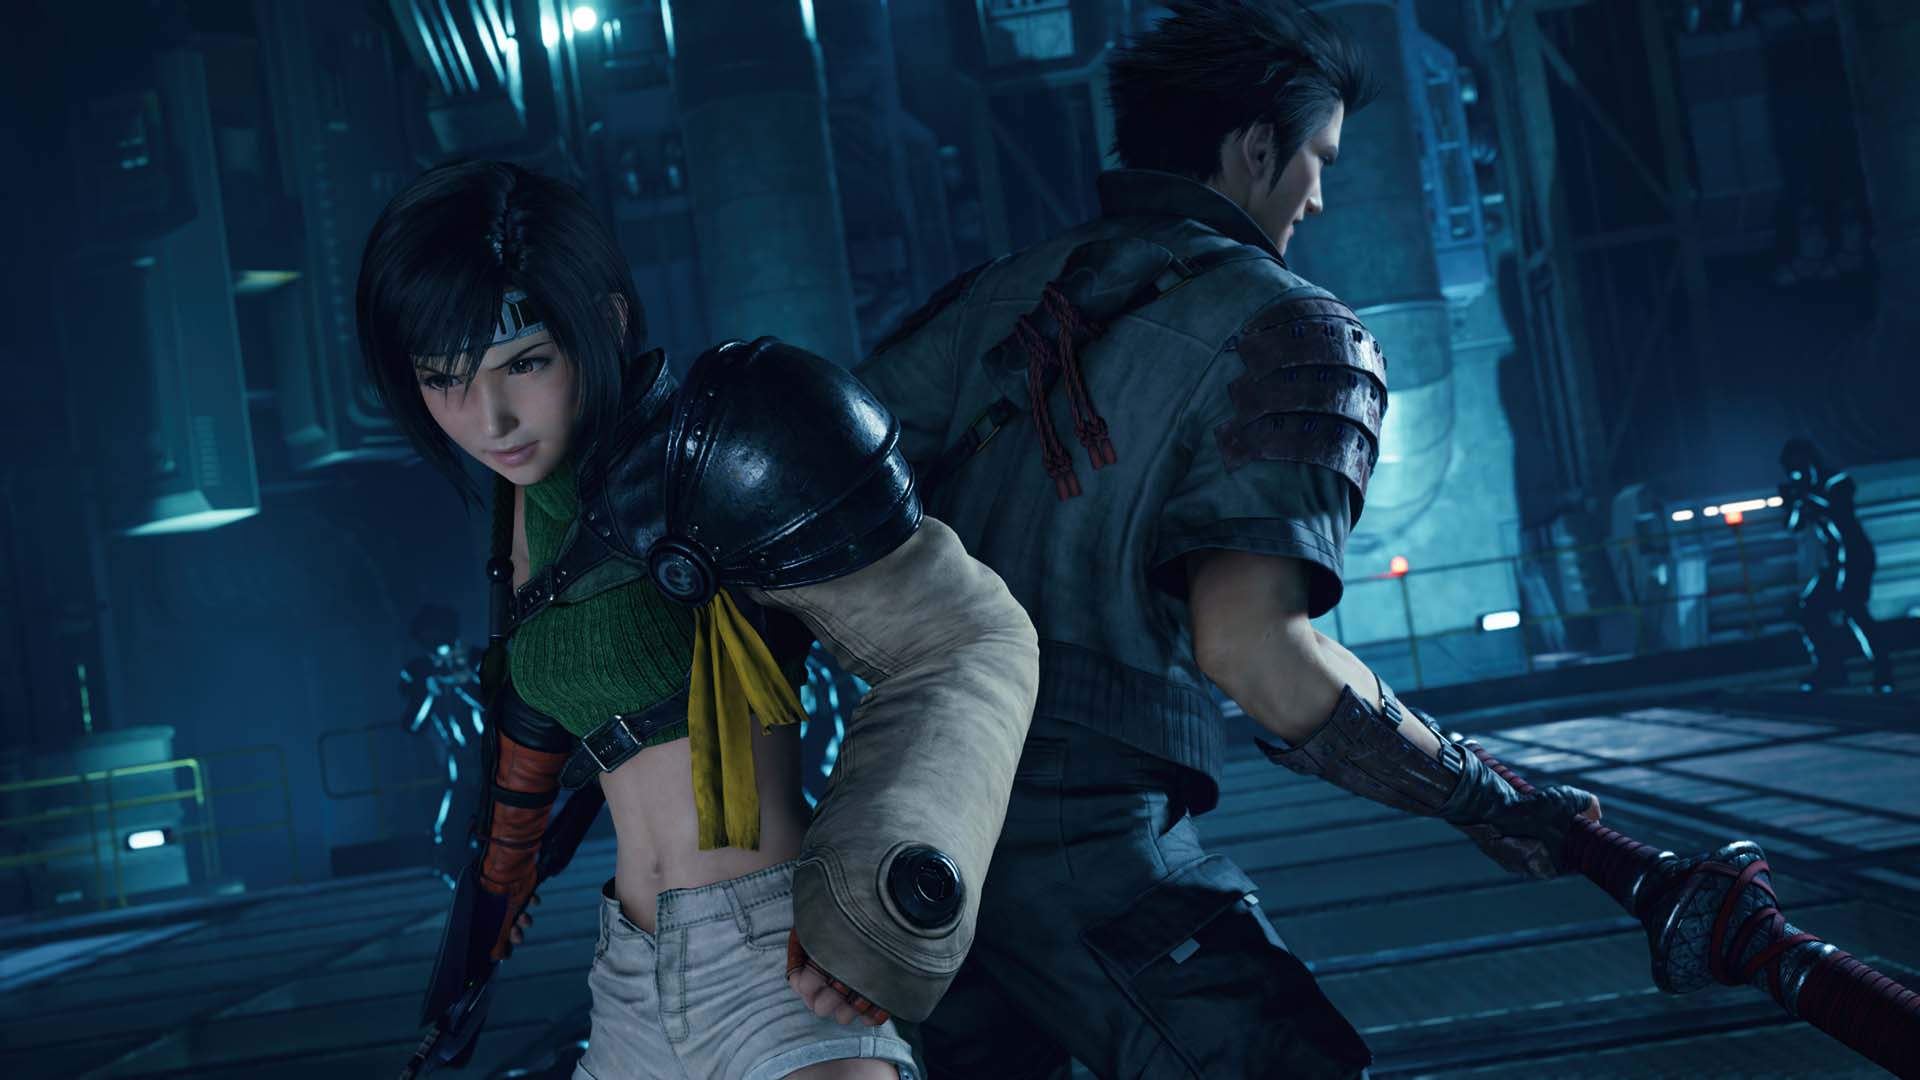 Final Fantasy VII Remake - EPISODE INTERmission (New Story Content Featuring Yuffie) DLC EU PS5 CD Key (11.29$)